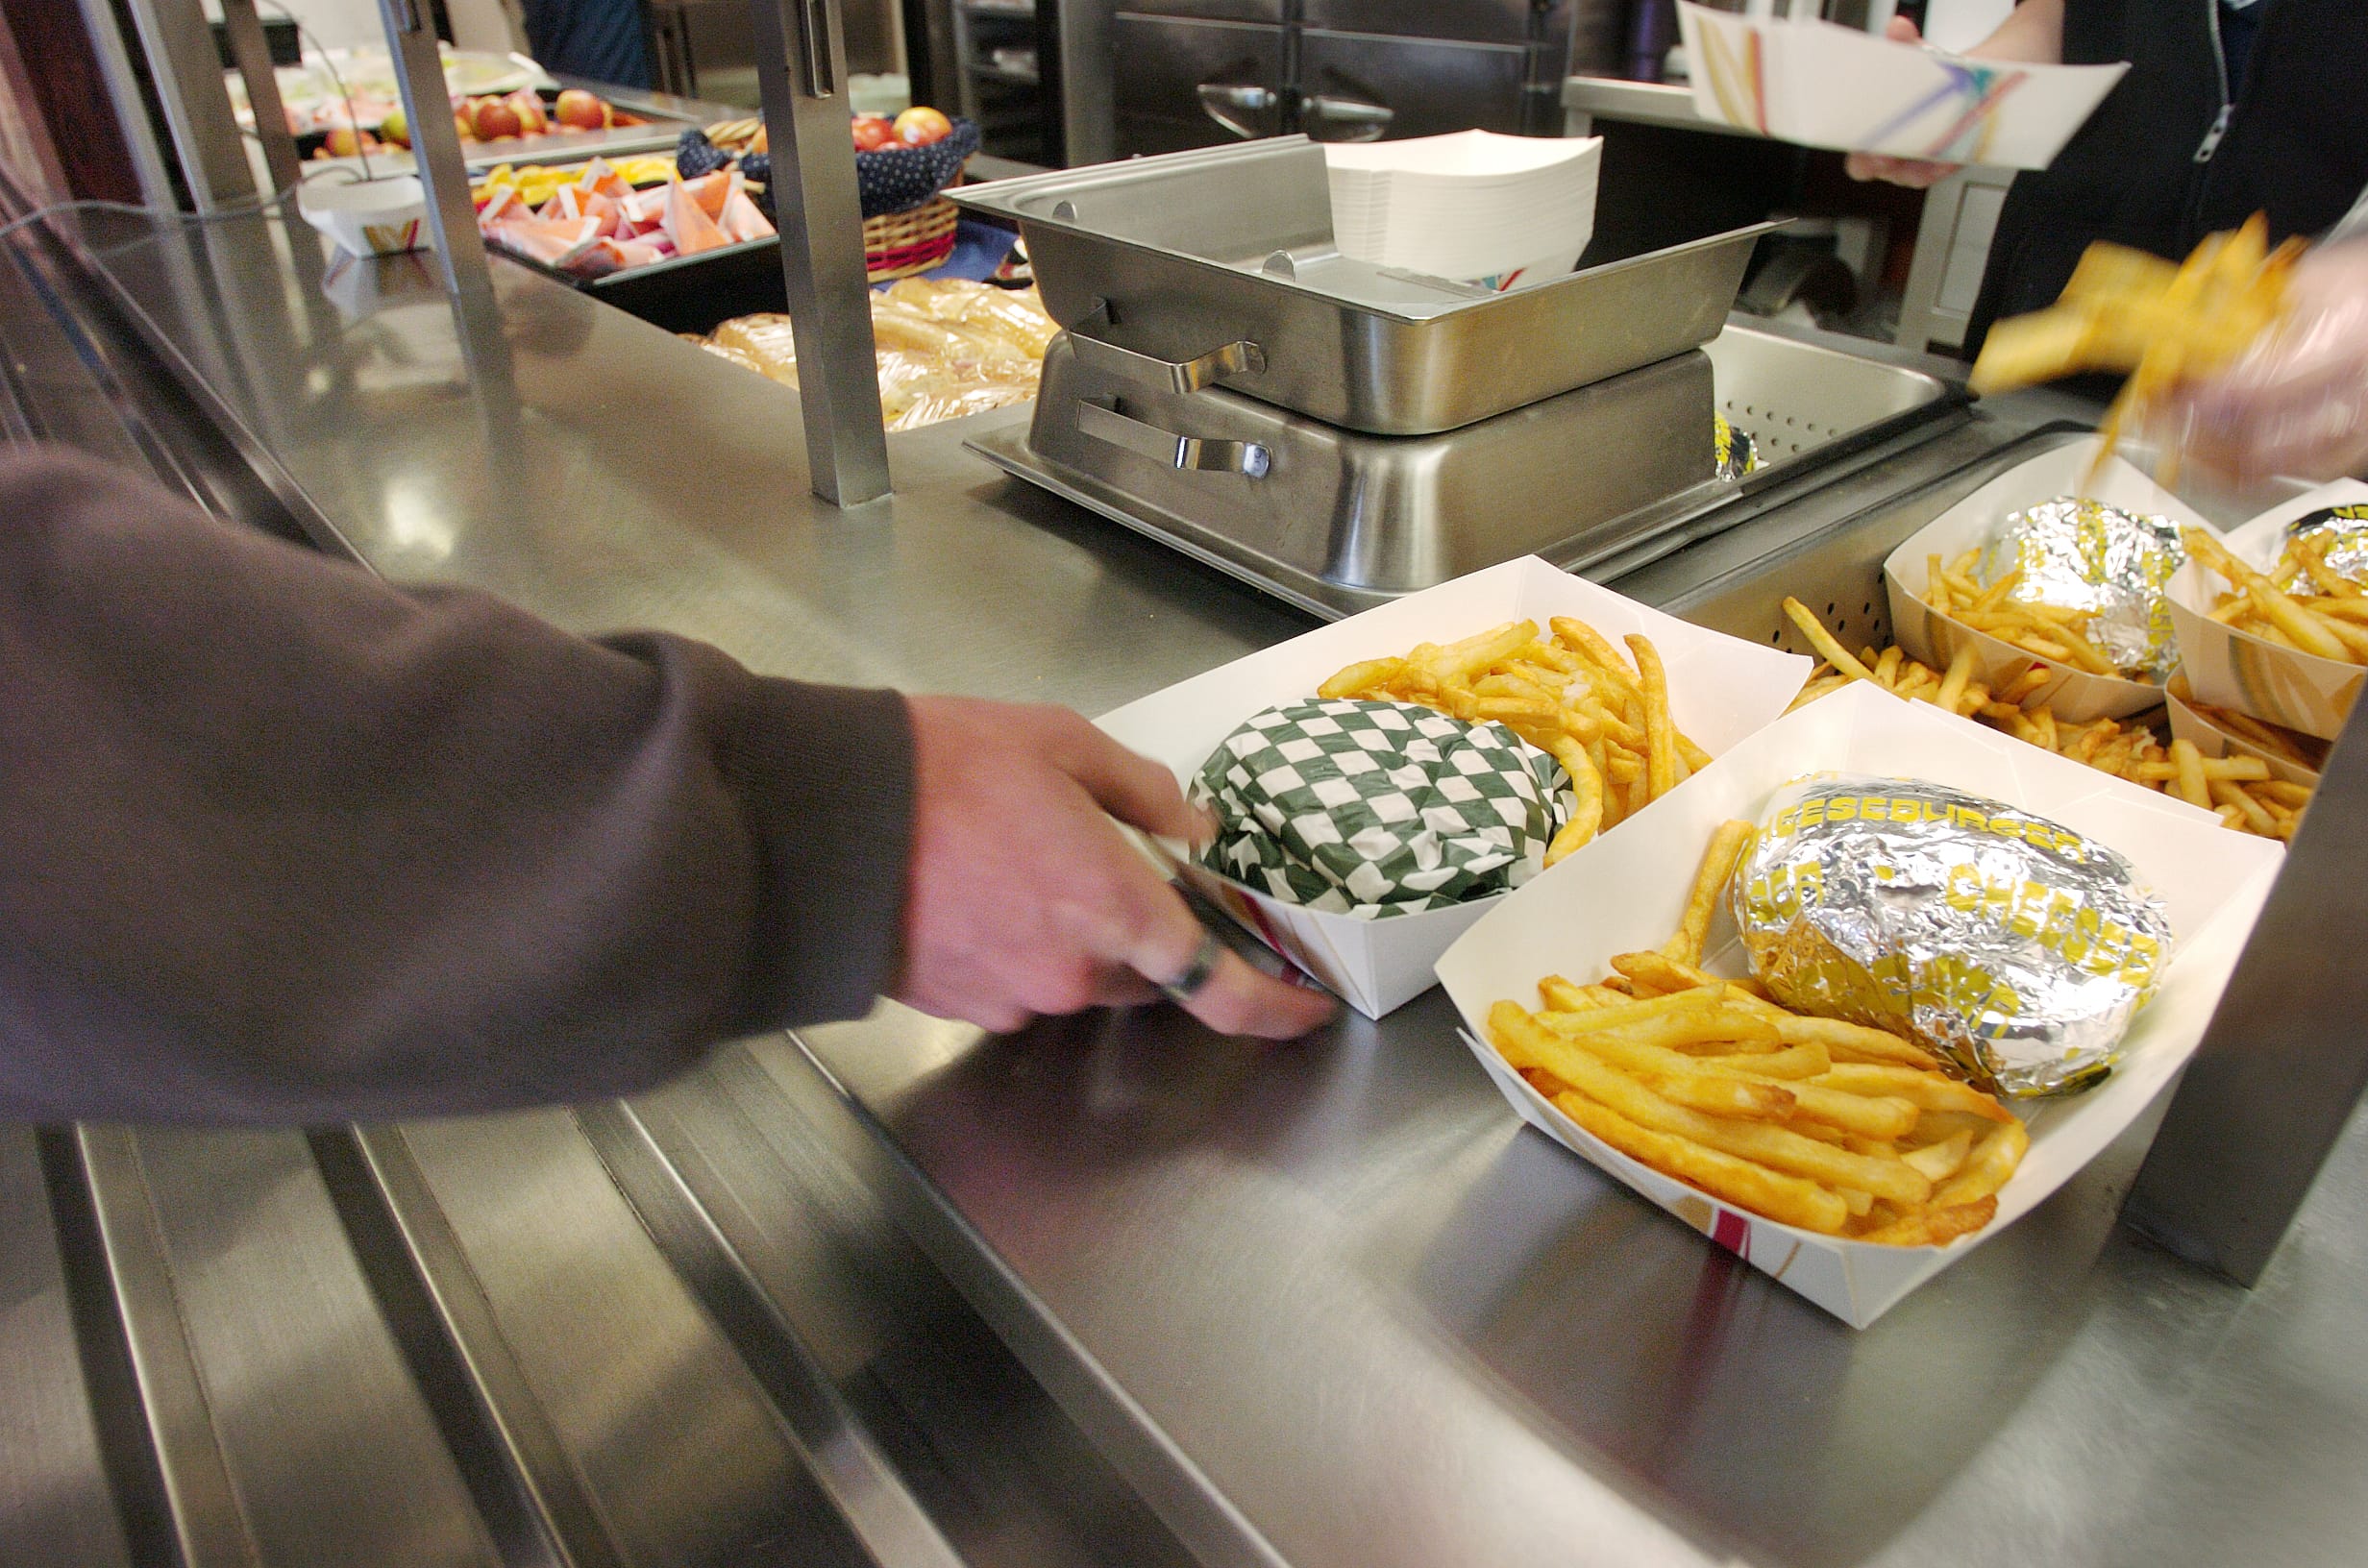 Chicken burgers and fries were among the more popular offering during the first lunch period at Ridgefield High School